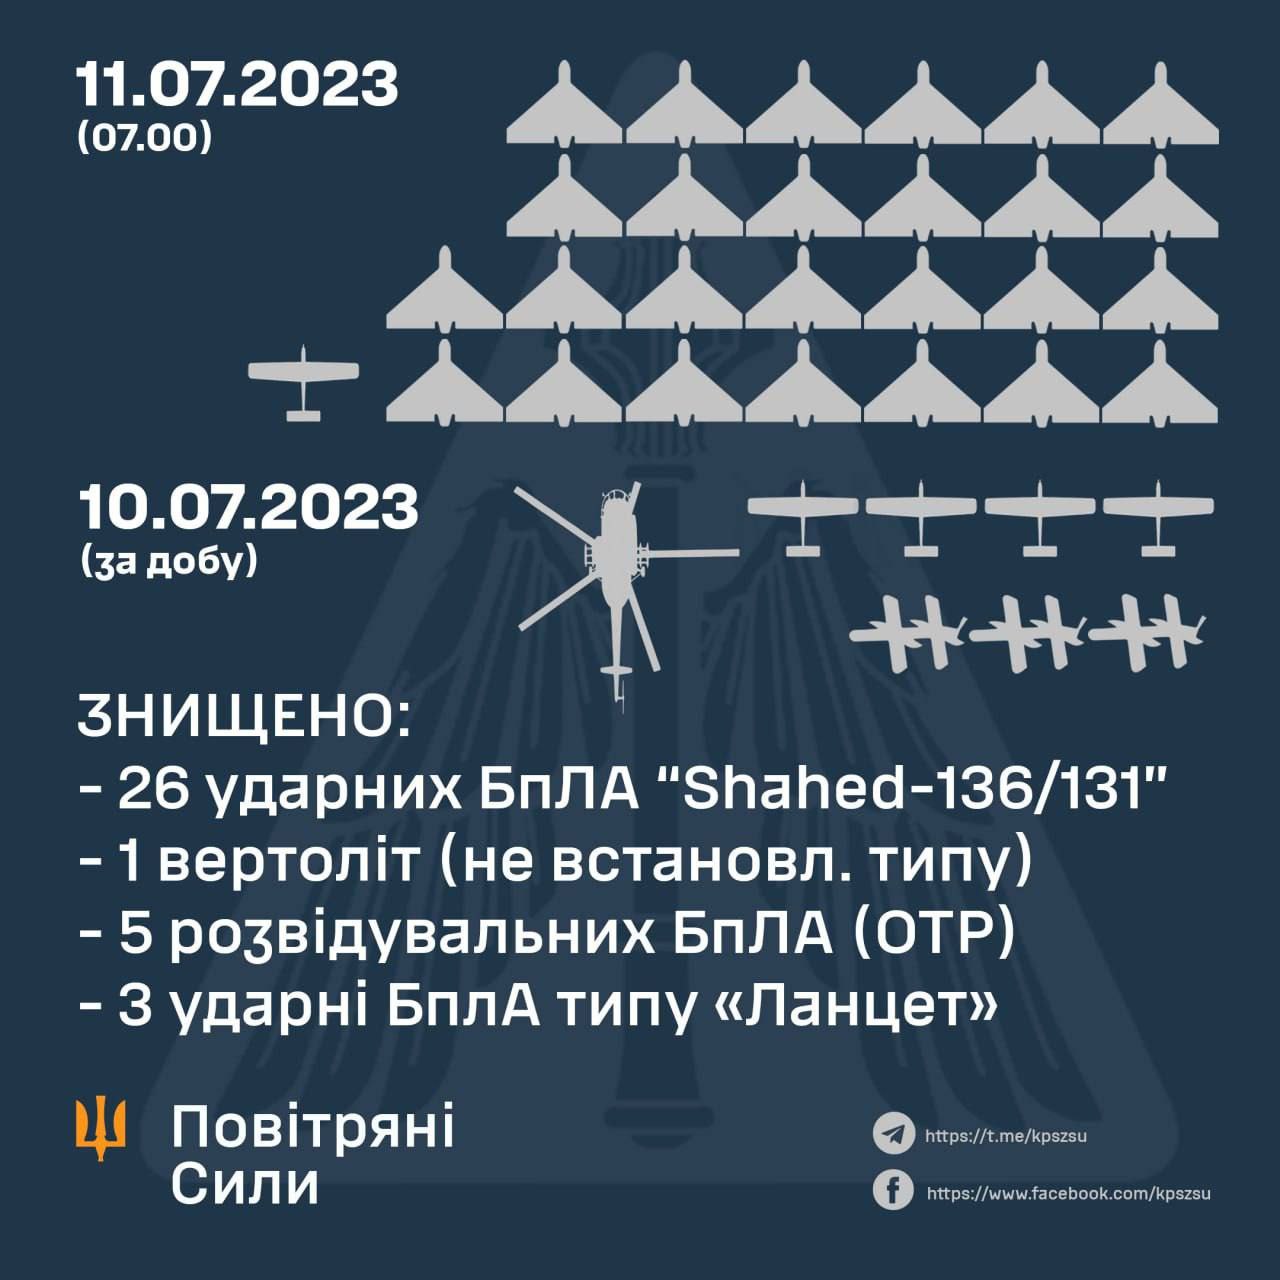 Lew Anno Suport #Ukraine 24/2-22 on Twitter: "💥 ⚠️ Destroyed 26 of 28 "Shaheed" 🔻 At night, the Russian invaders attacked Ukraine from the south-eastern direction (Primorsko-Akhtarsk) with attack drones. 🔻